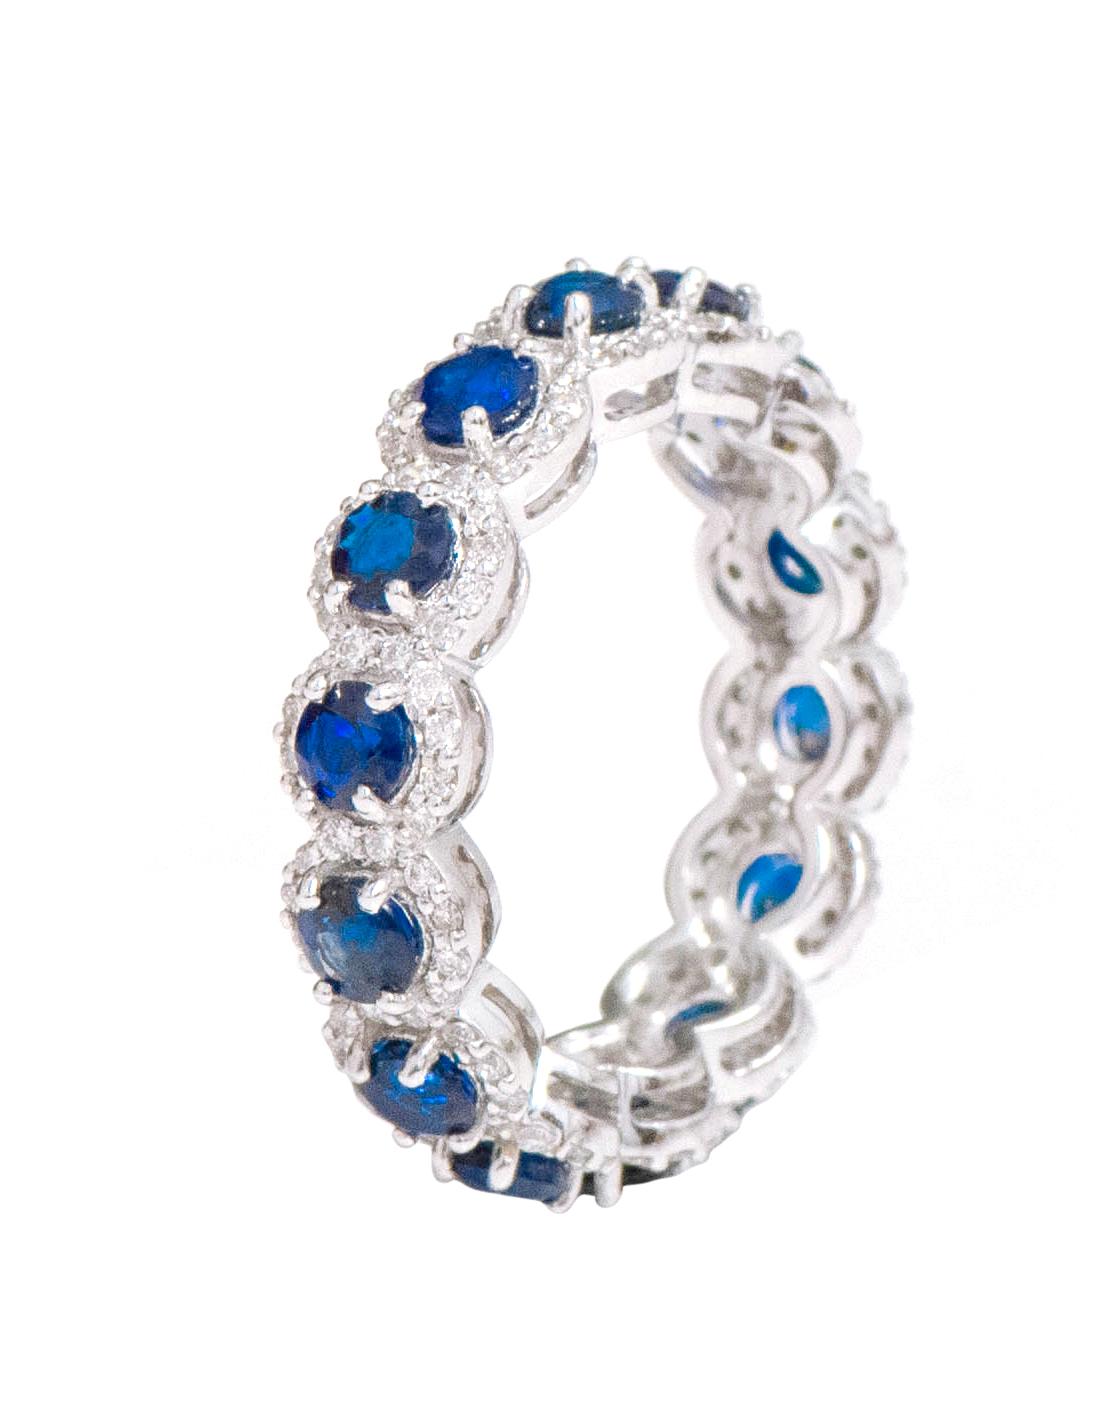 18 Karat White Gold 3.39 Carat Sapphire and Diamond Cluster Eternity Band Ring For Sale 1